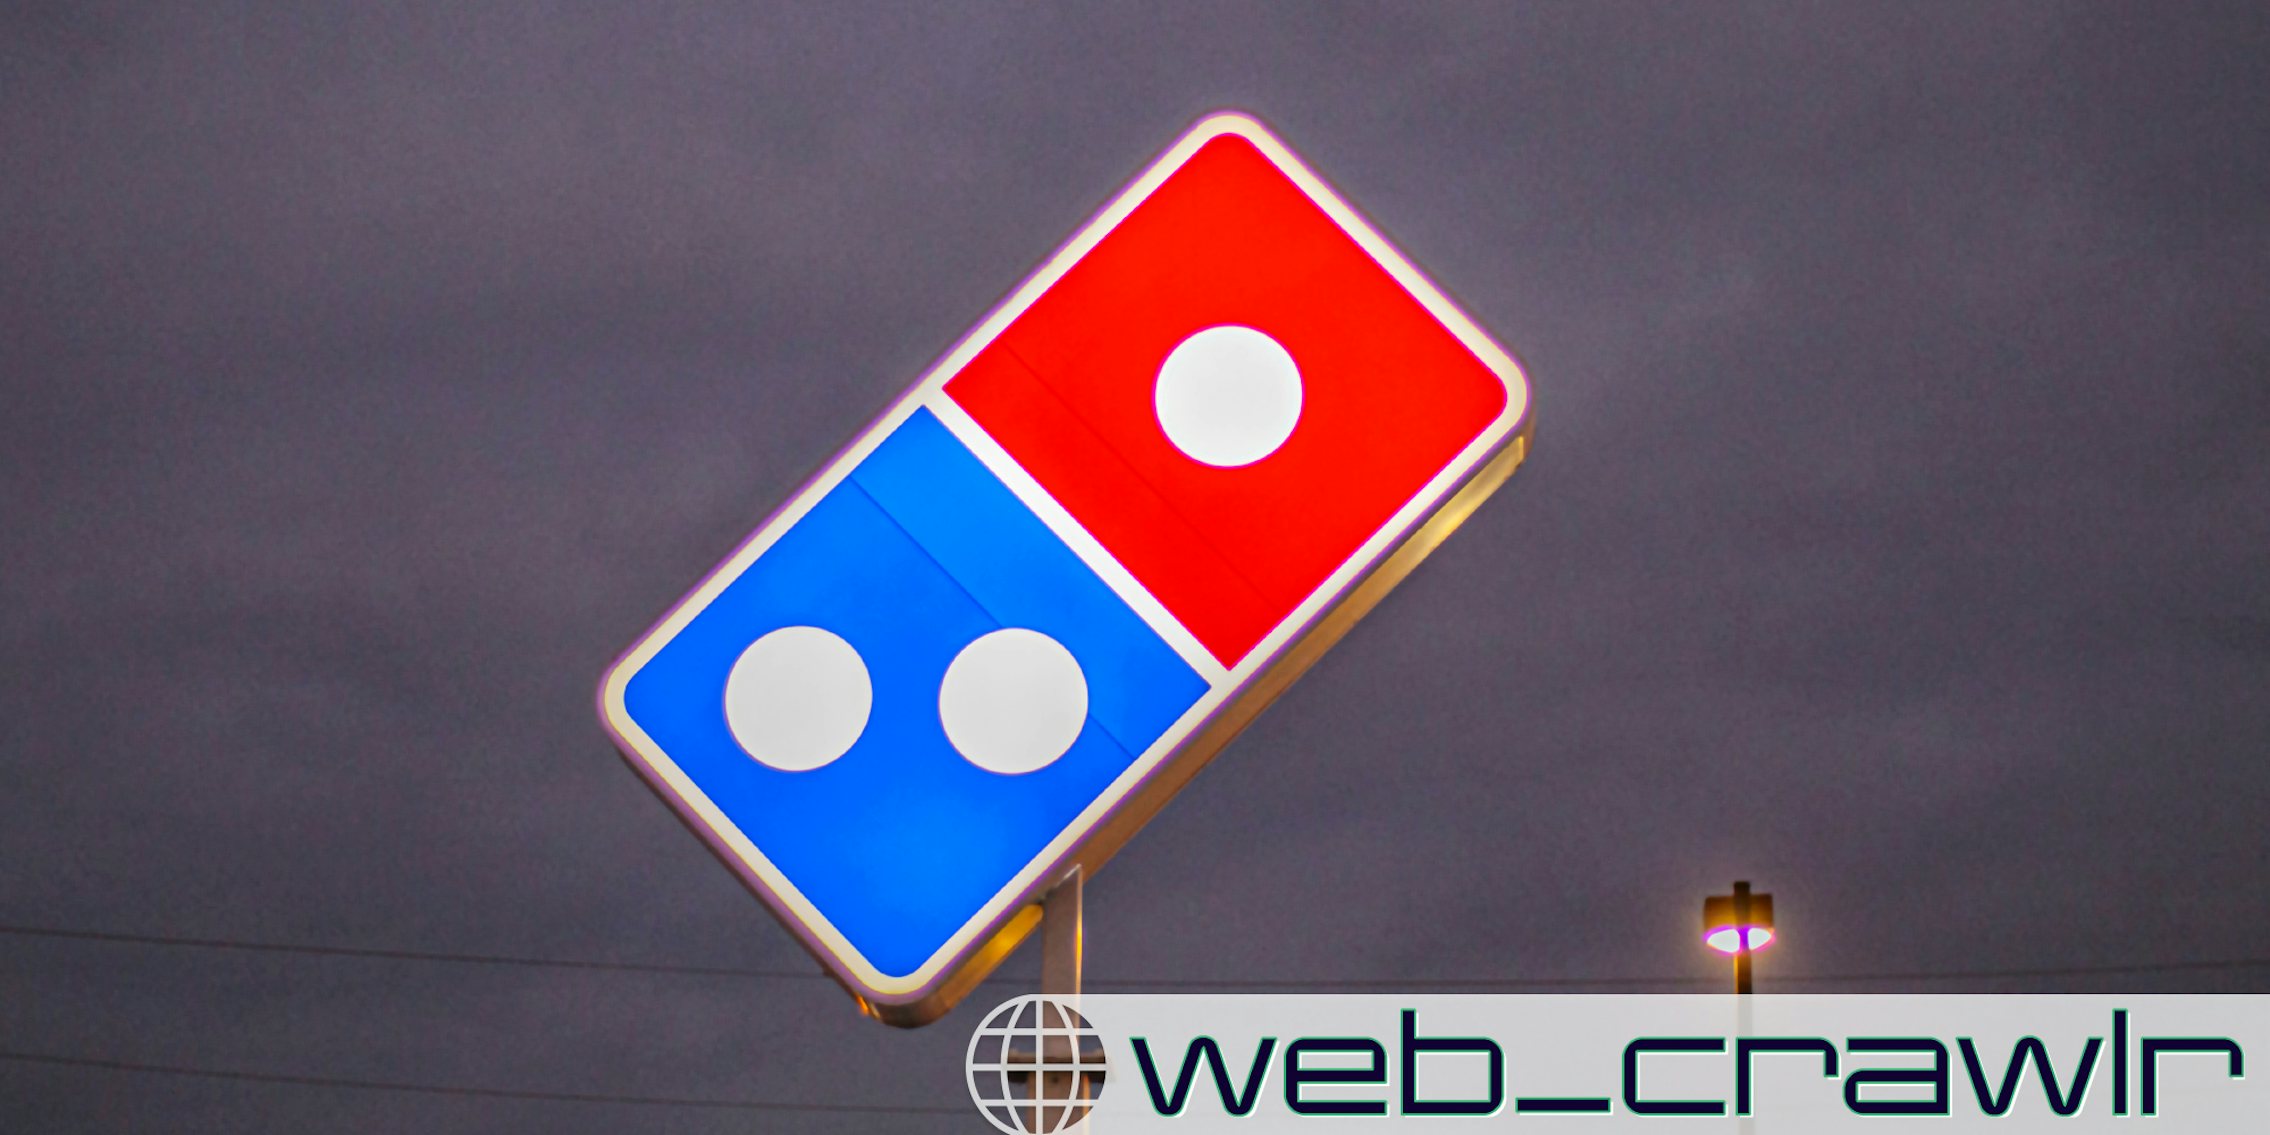 A Domino's Pizza sign. The Daily Dot newsletter web_crawlr logo is in the bottom right corner.